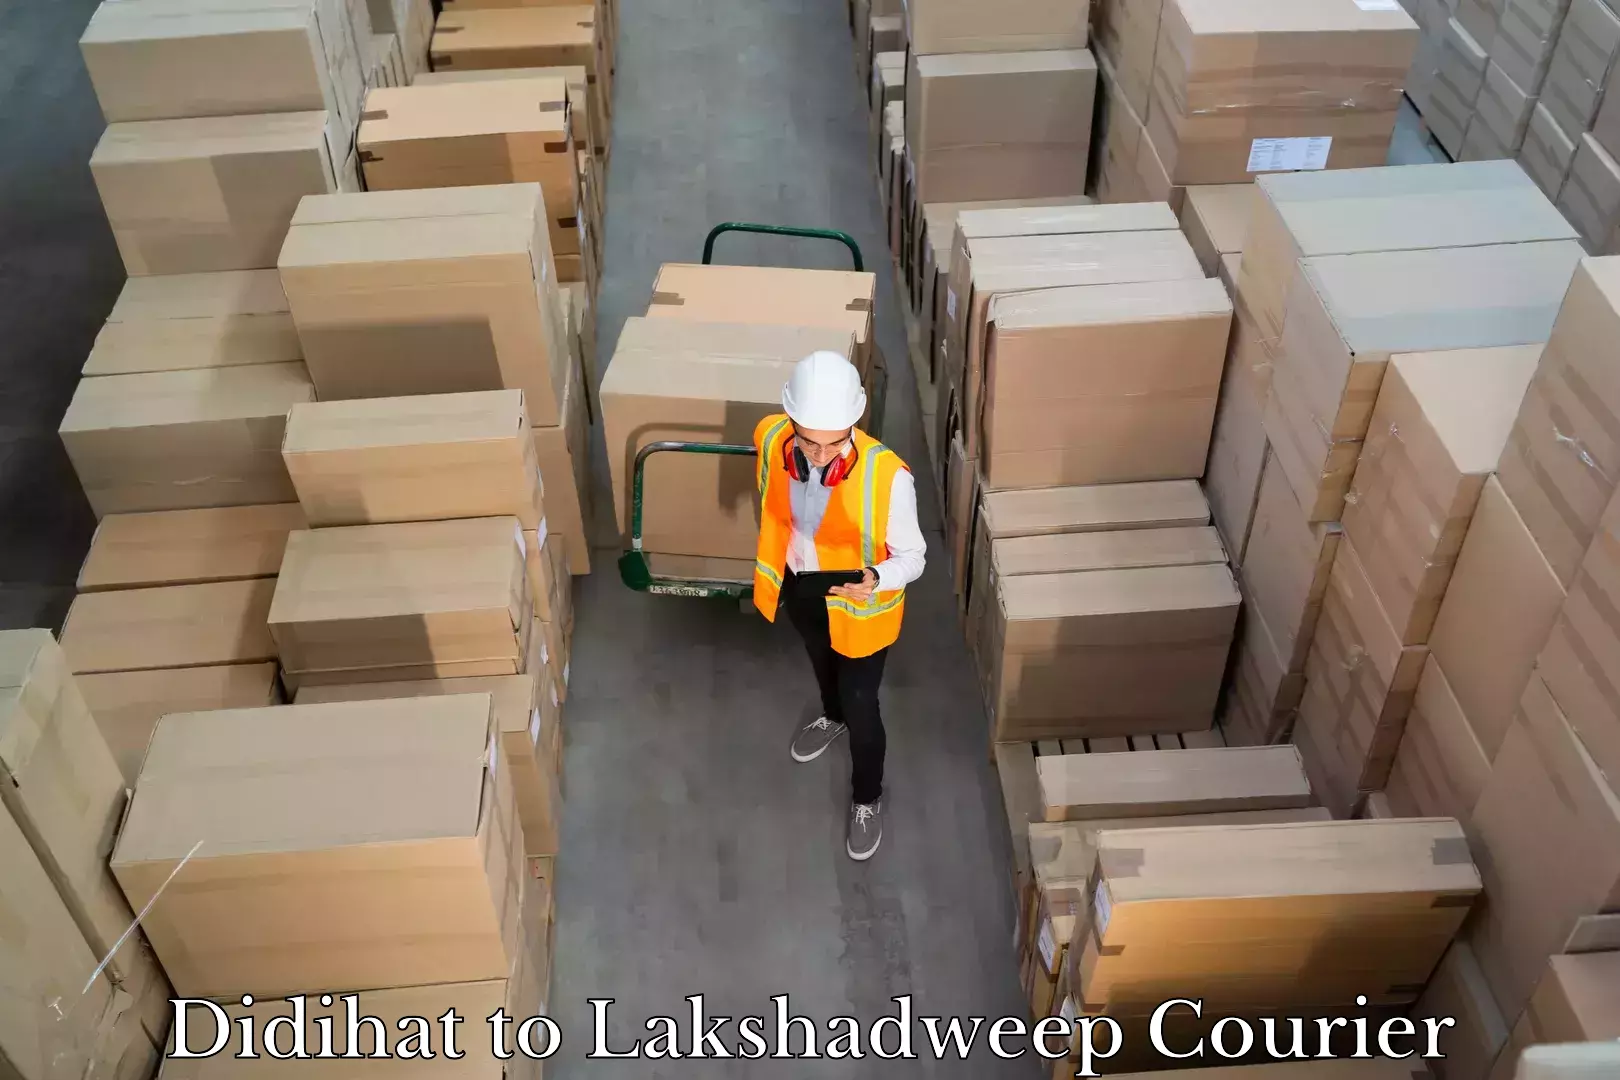 Luggage shipping specialists Didihat to Lakshadweep